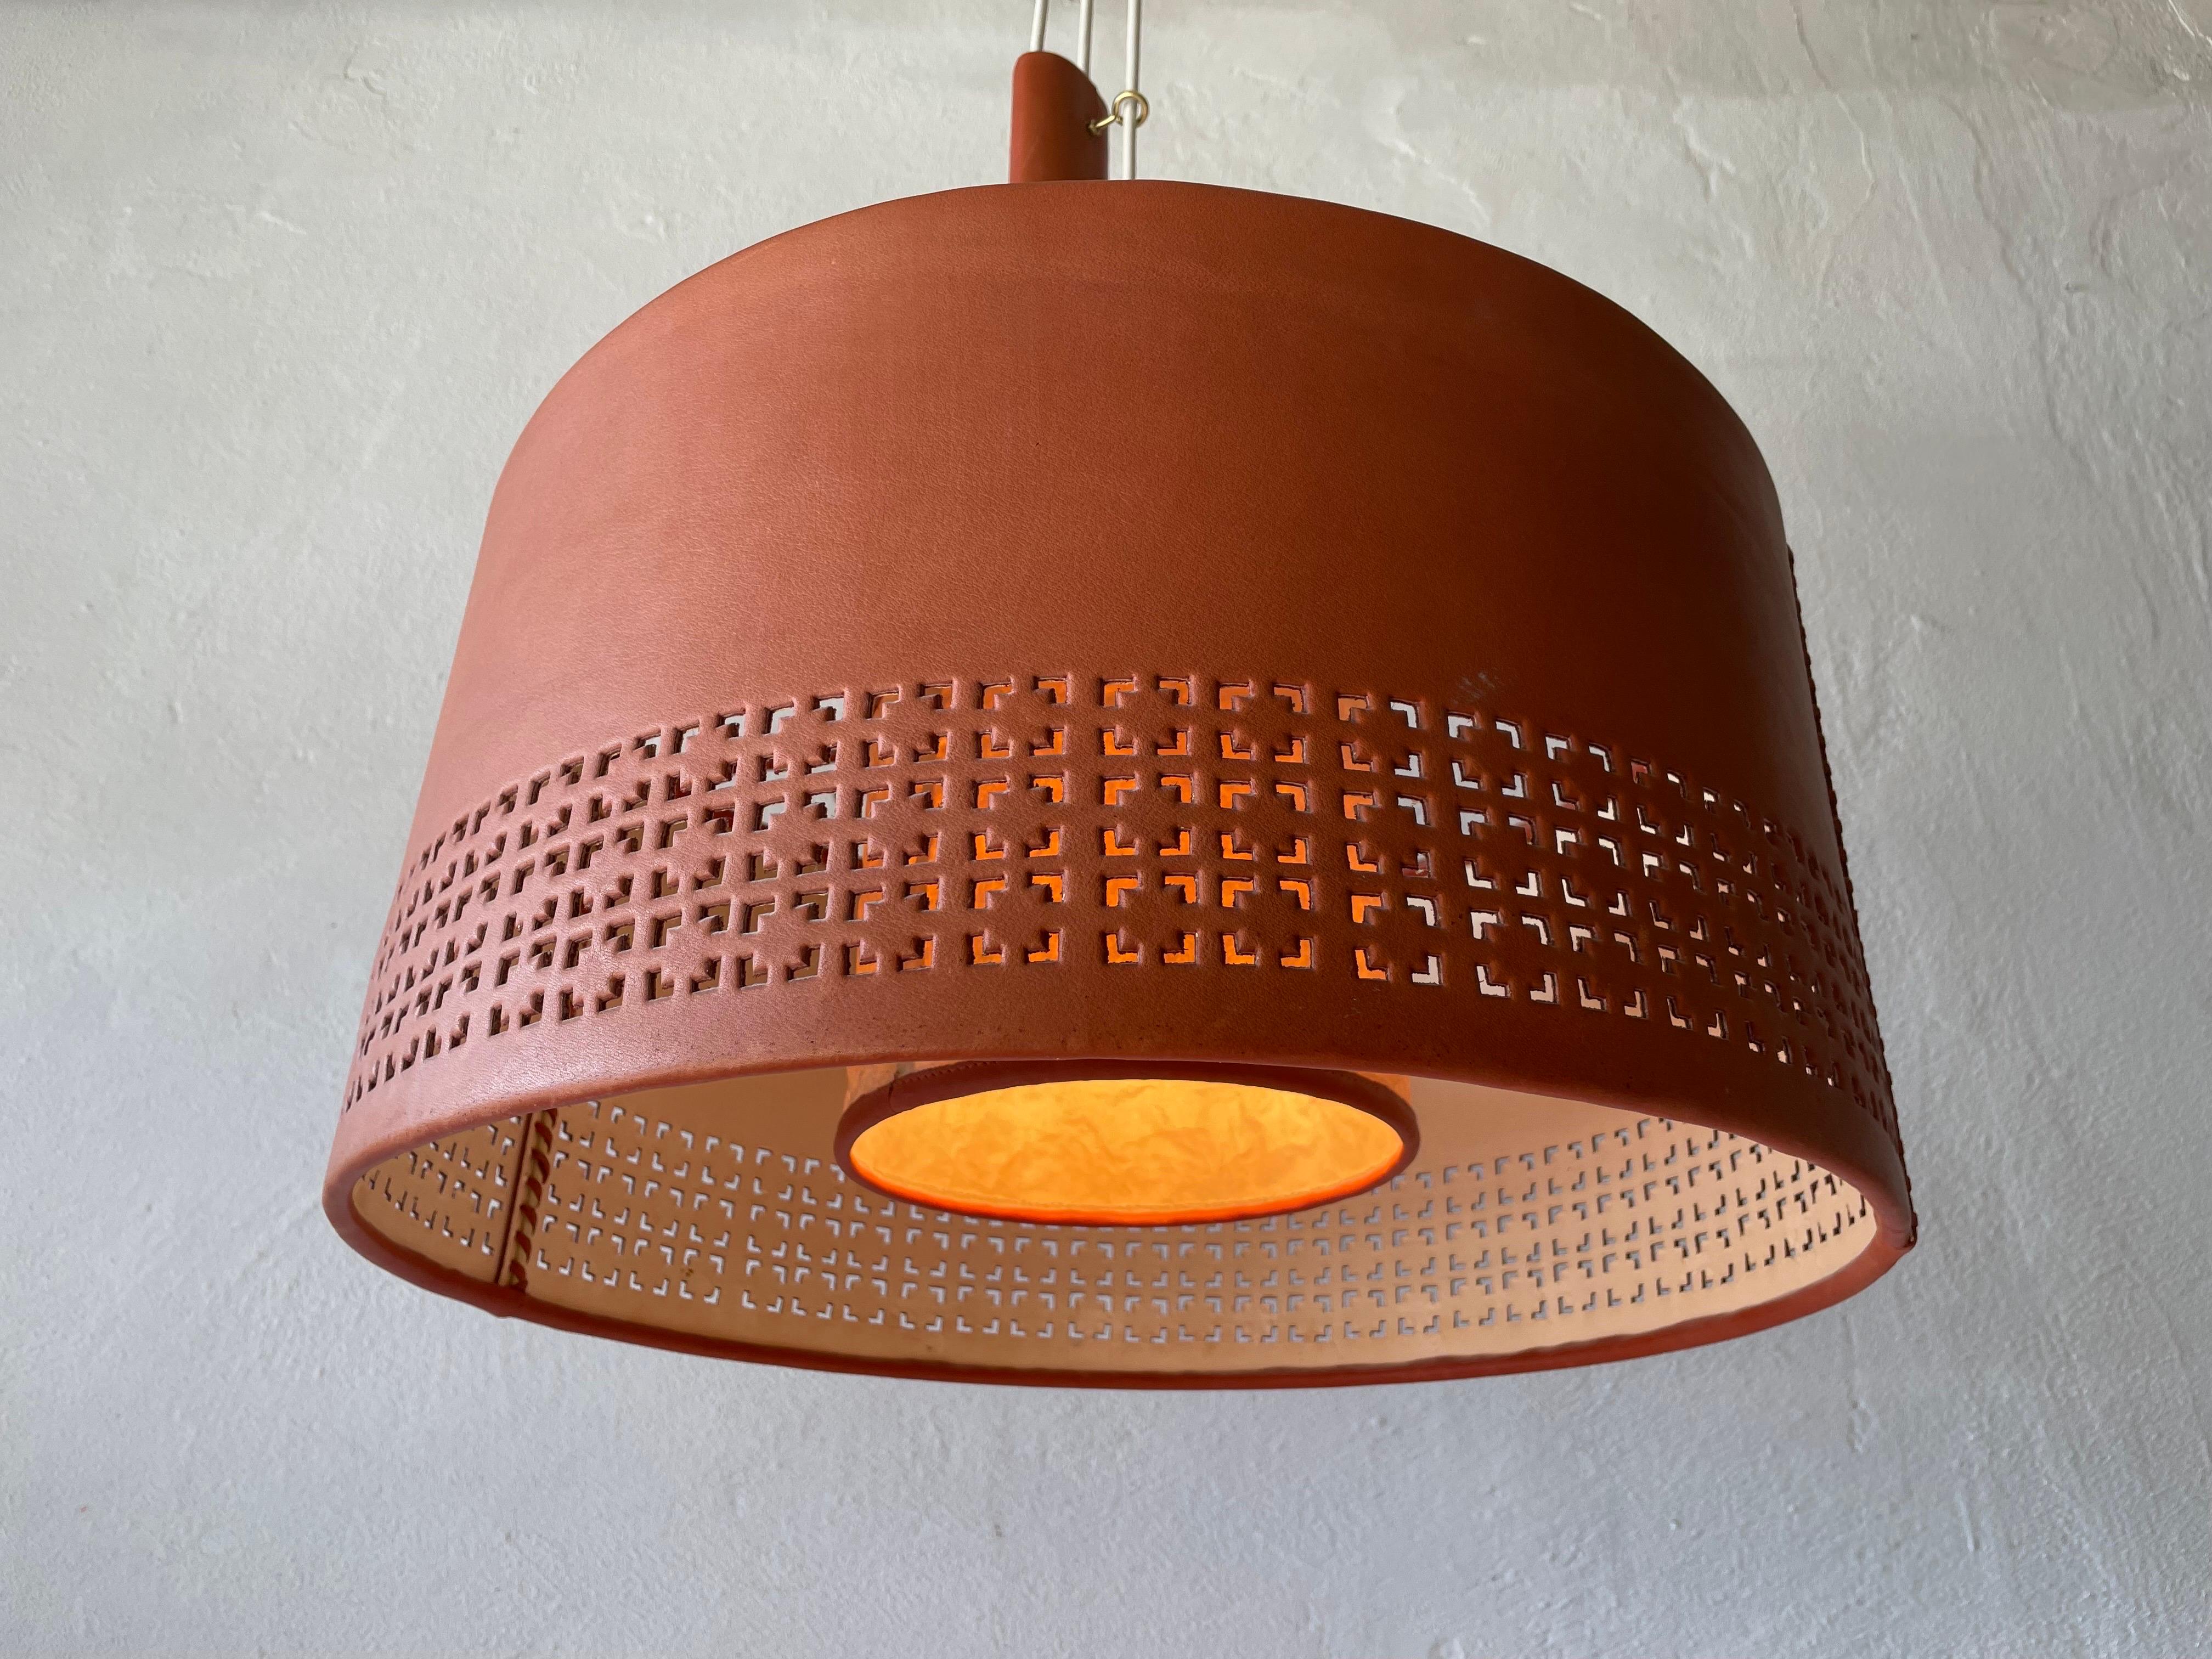 Cylindrical Leather Shade with Motifs Counterweight Pendant Lamp, 1960s, Germany For Sale 12